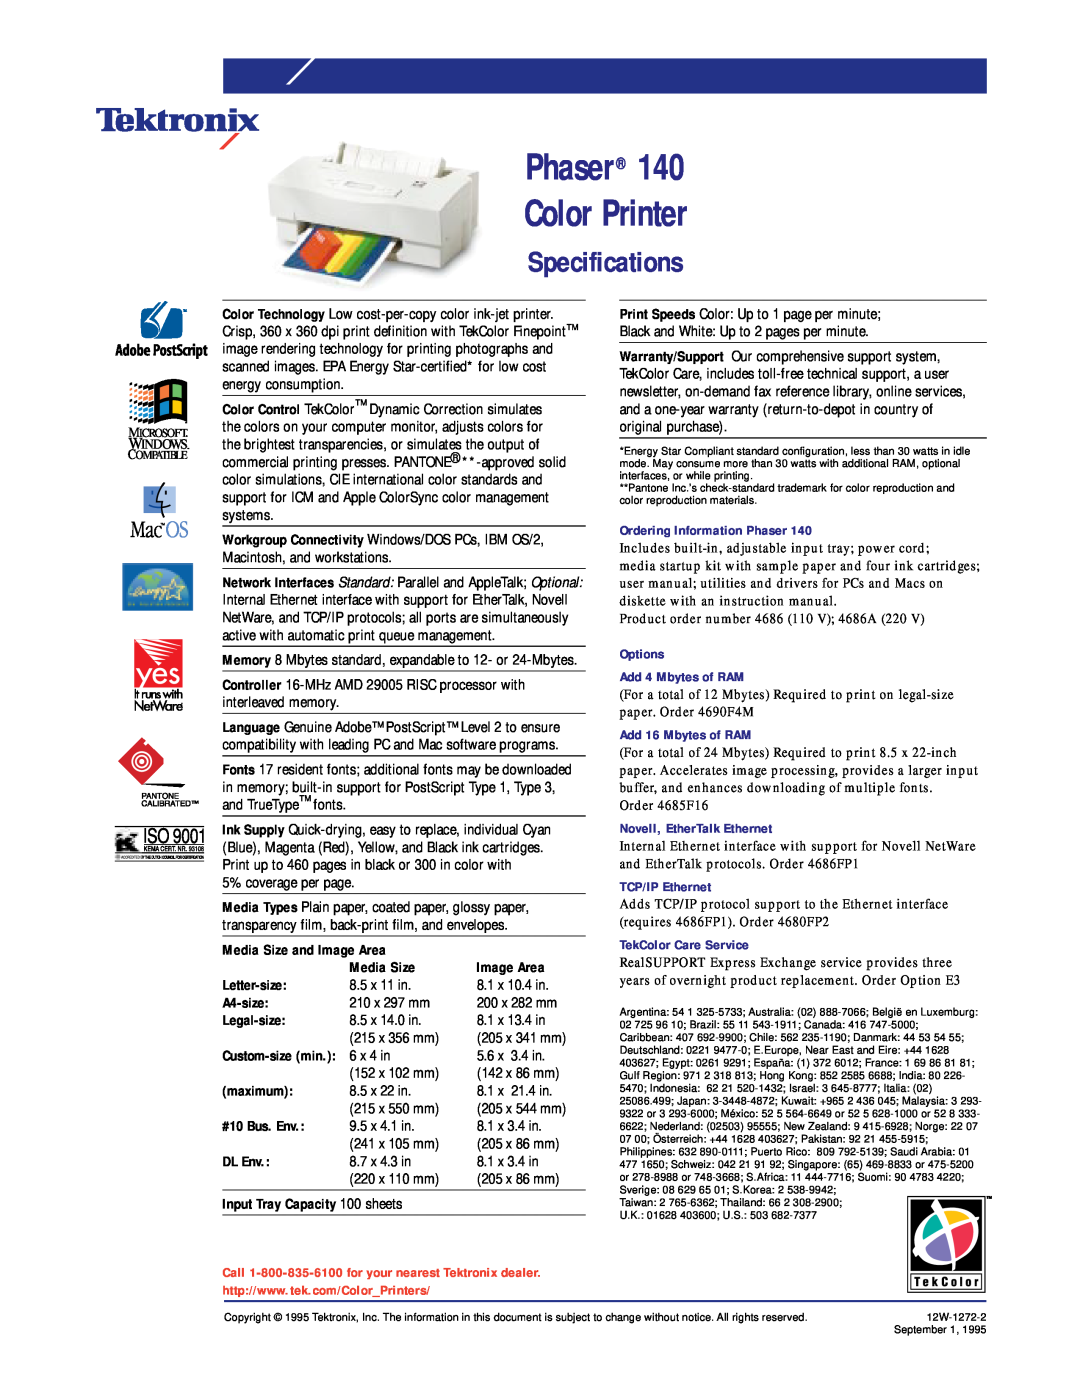 Tektronix specifications Specifications, Phaser 140 Color Printer 